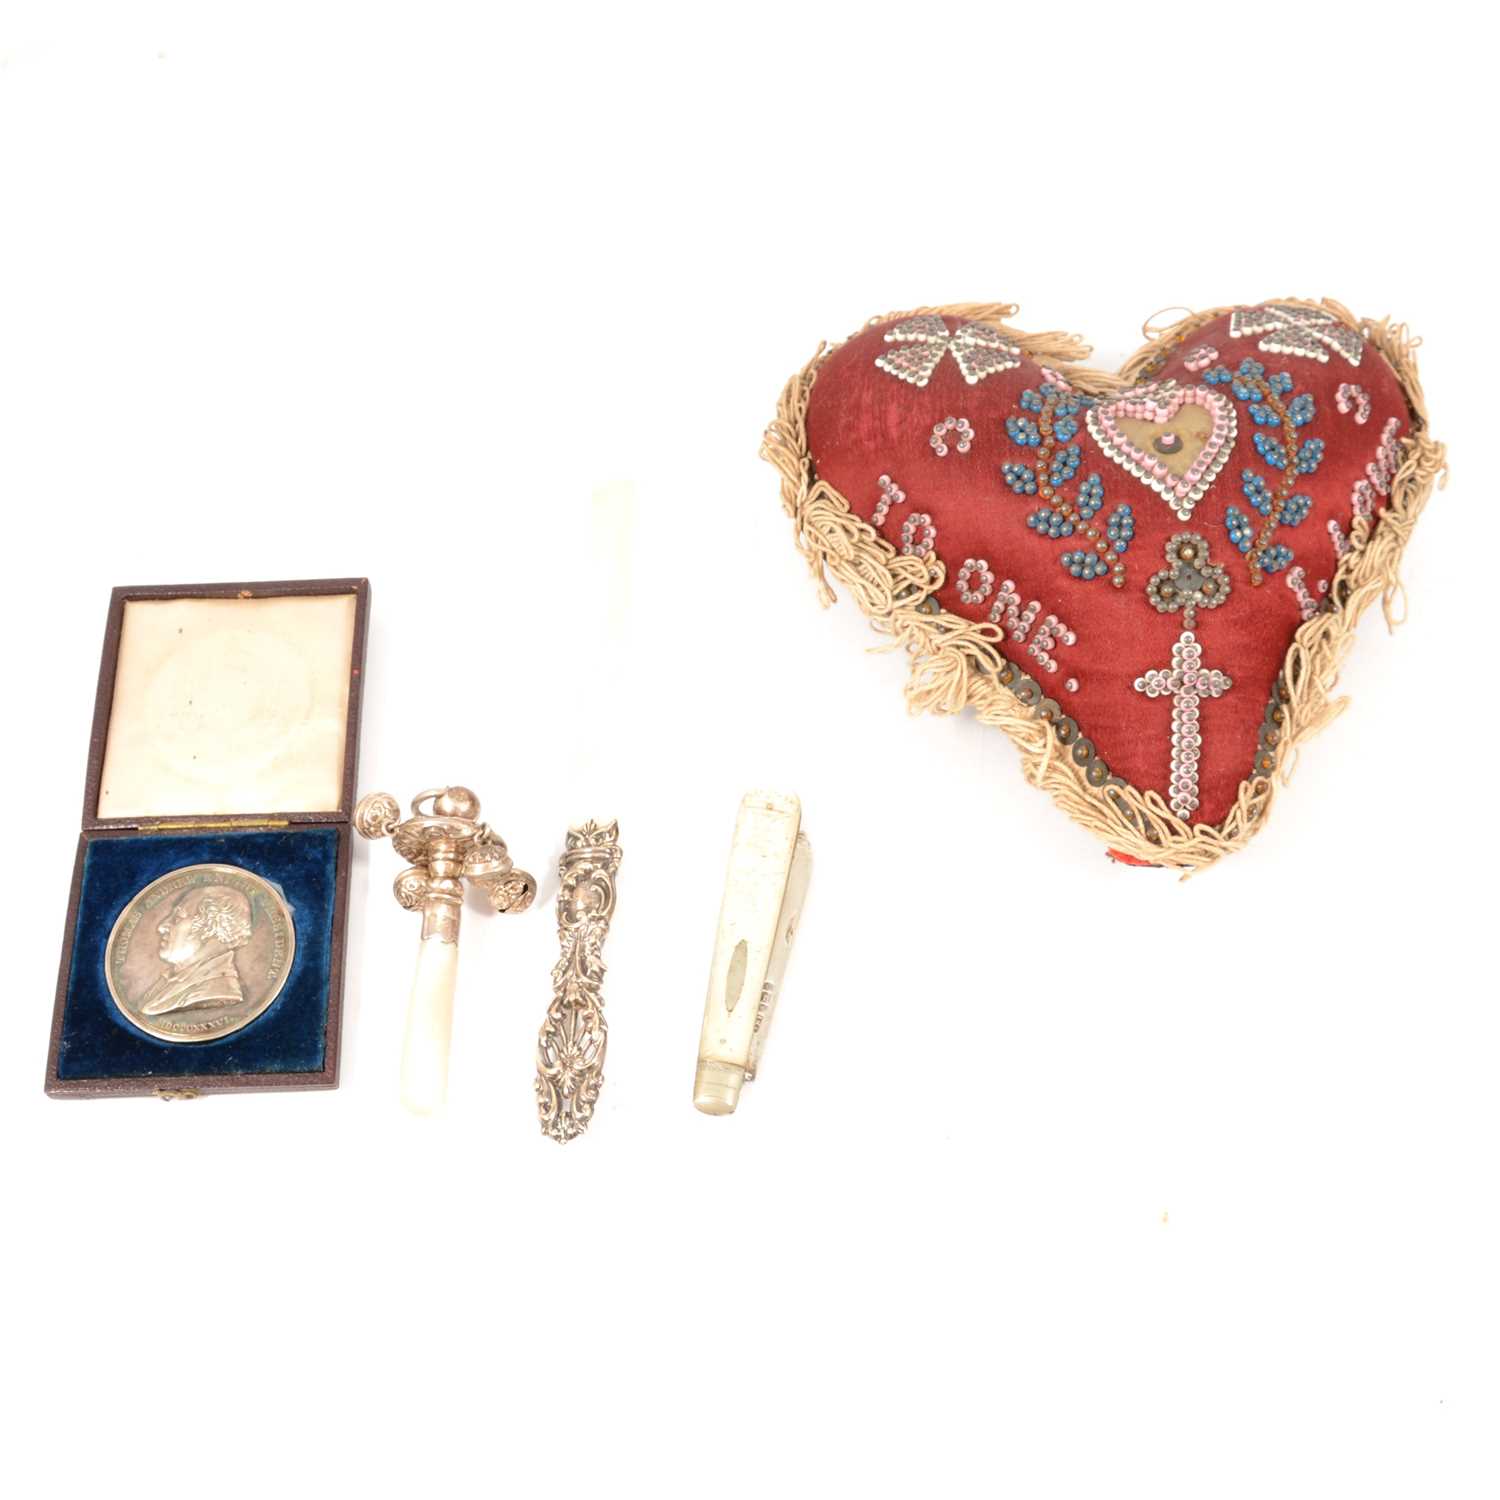 A heart shaped beaded pin cushion, Royal Horicultural Society medal, baby's rattle and other silver.